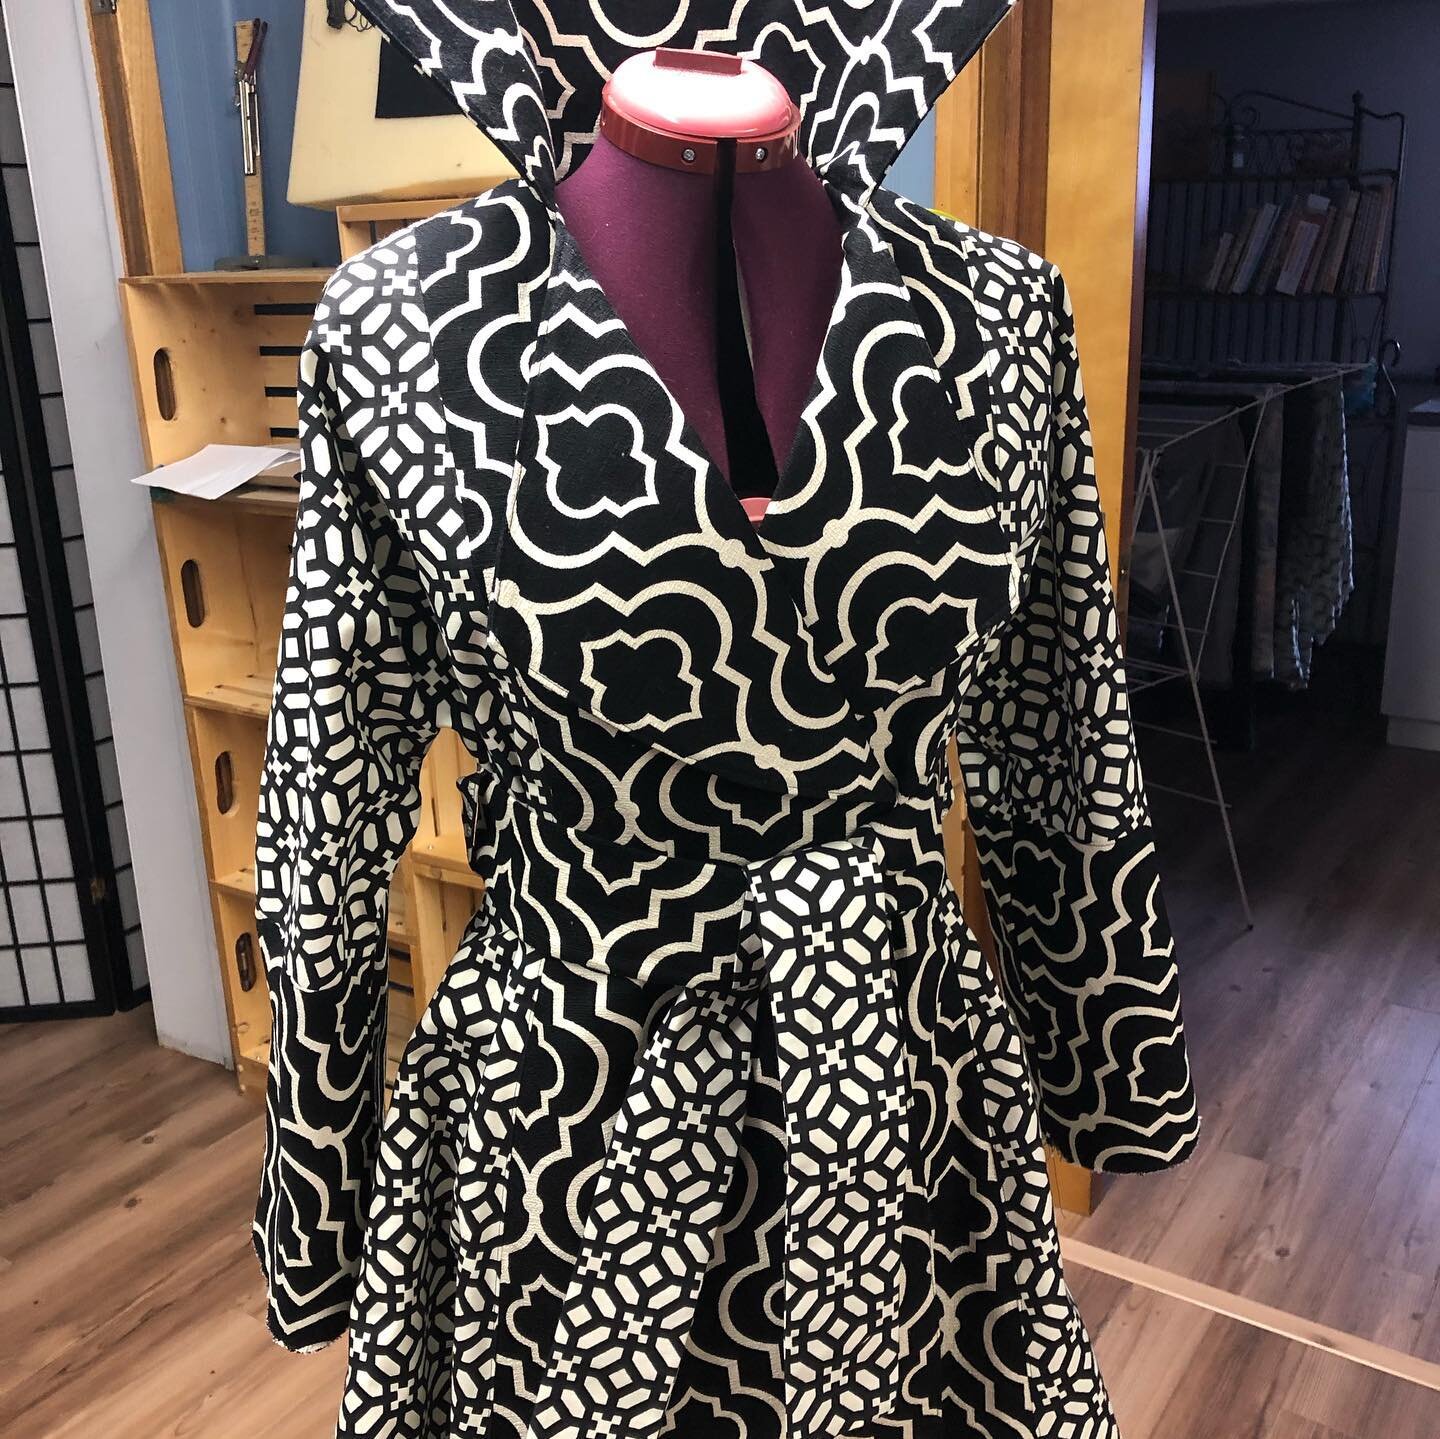 It&rsquo;s almost done... sorry but this beauty is already spoken for...
#handmadeinmuskoka #slowfashion #fashioncircuitseries2020 #fibrefashion #funkyfearlessfashion #bewhoyouare #wearwhatyoulove